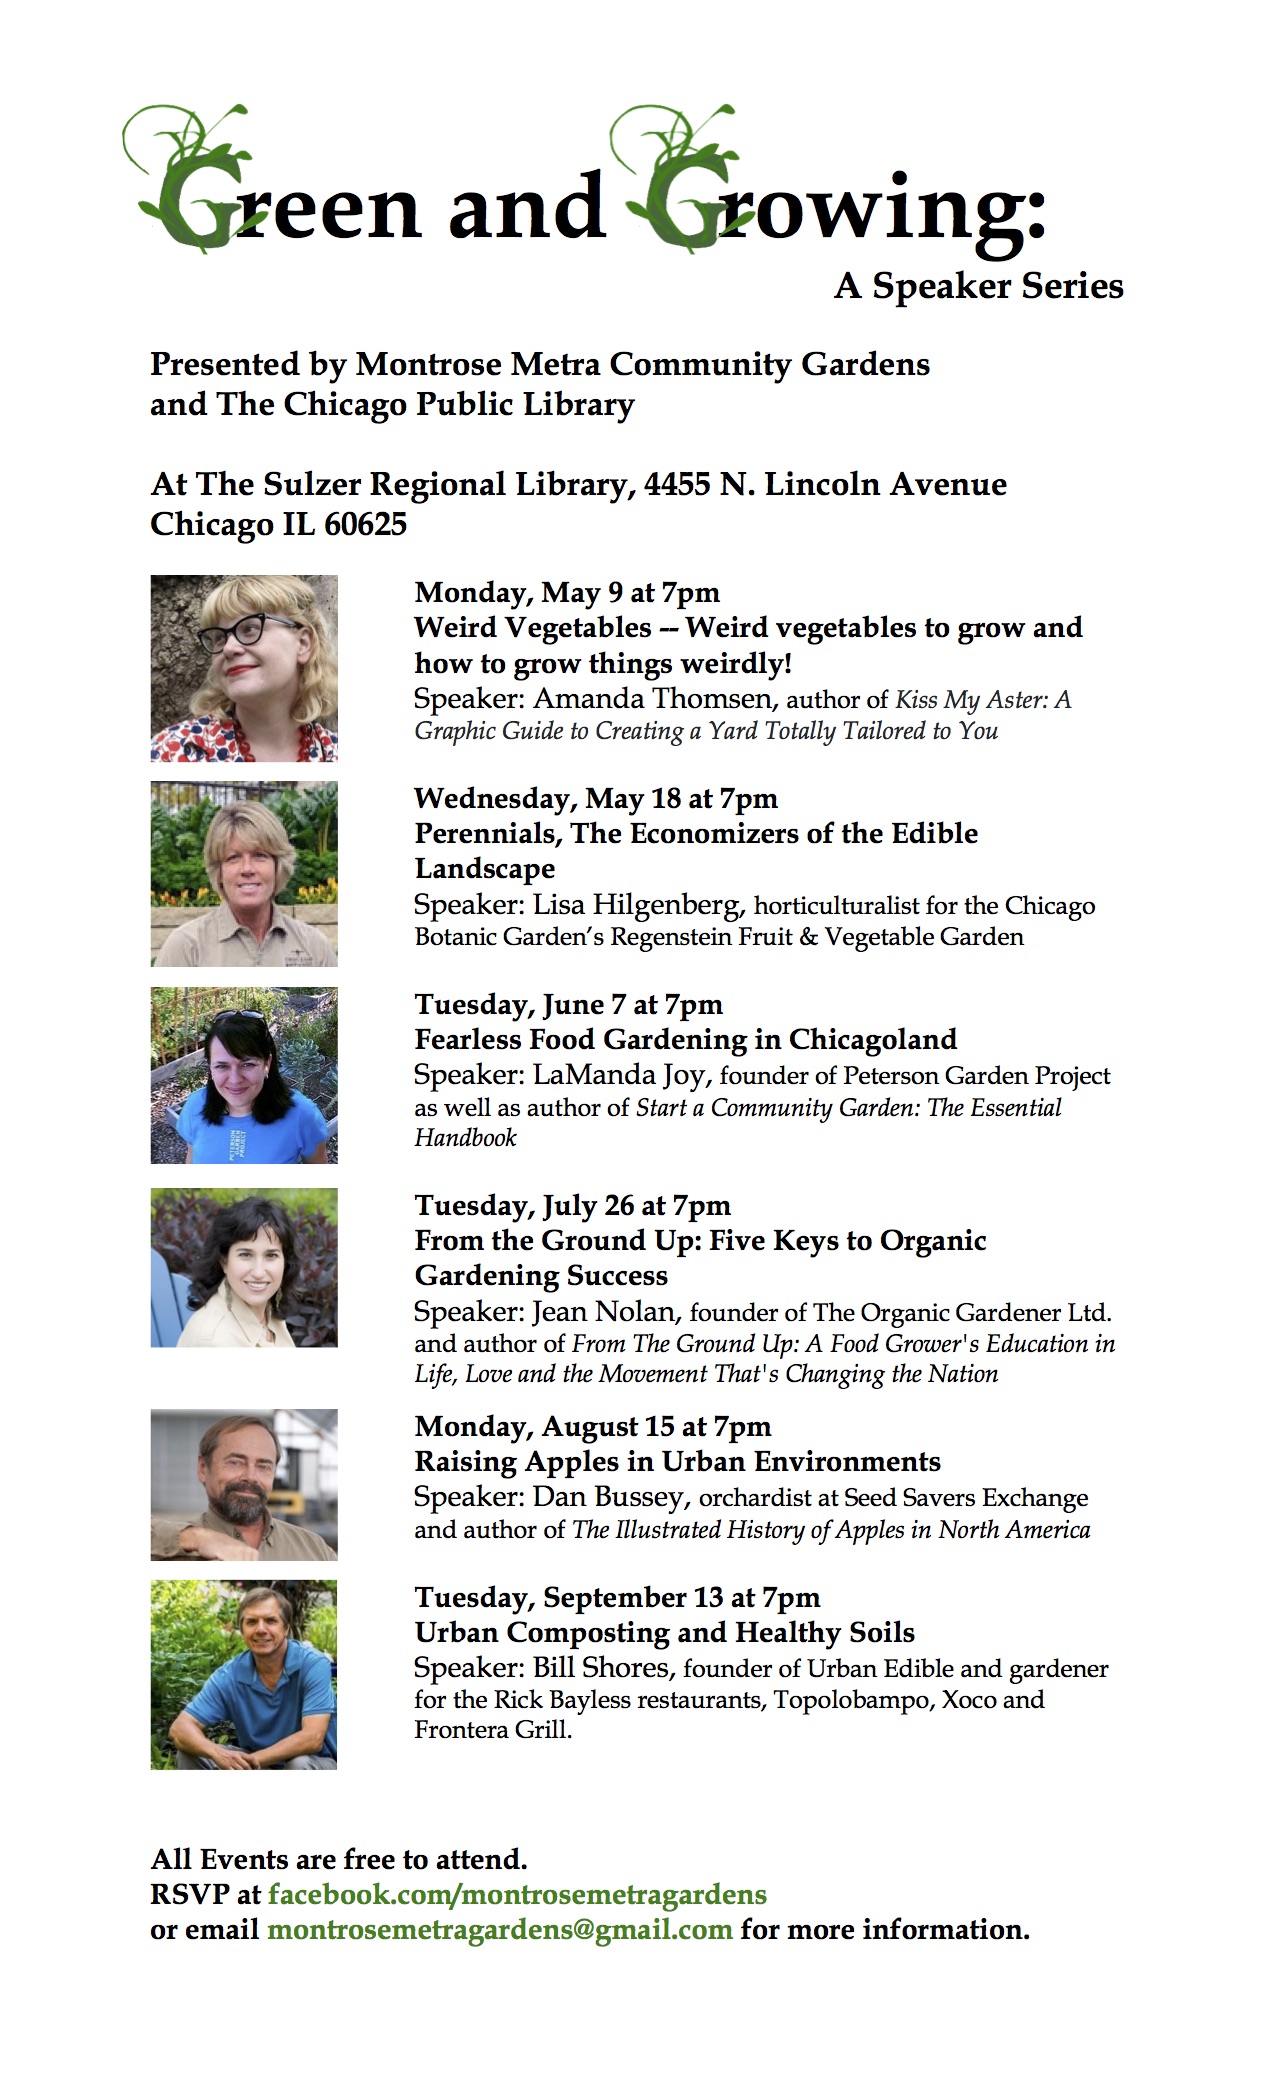 Green and Growing: A Speaker Series – Perennials, The Economizers of the Edible Landscape